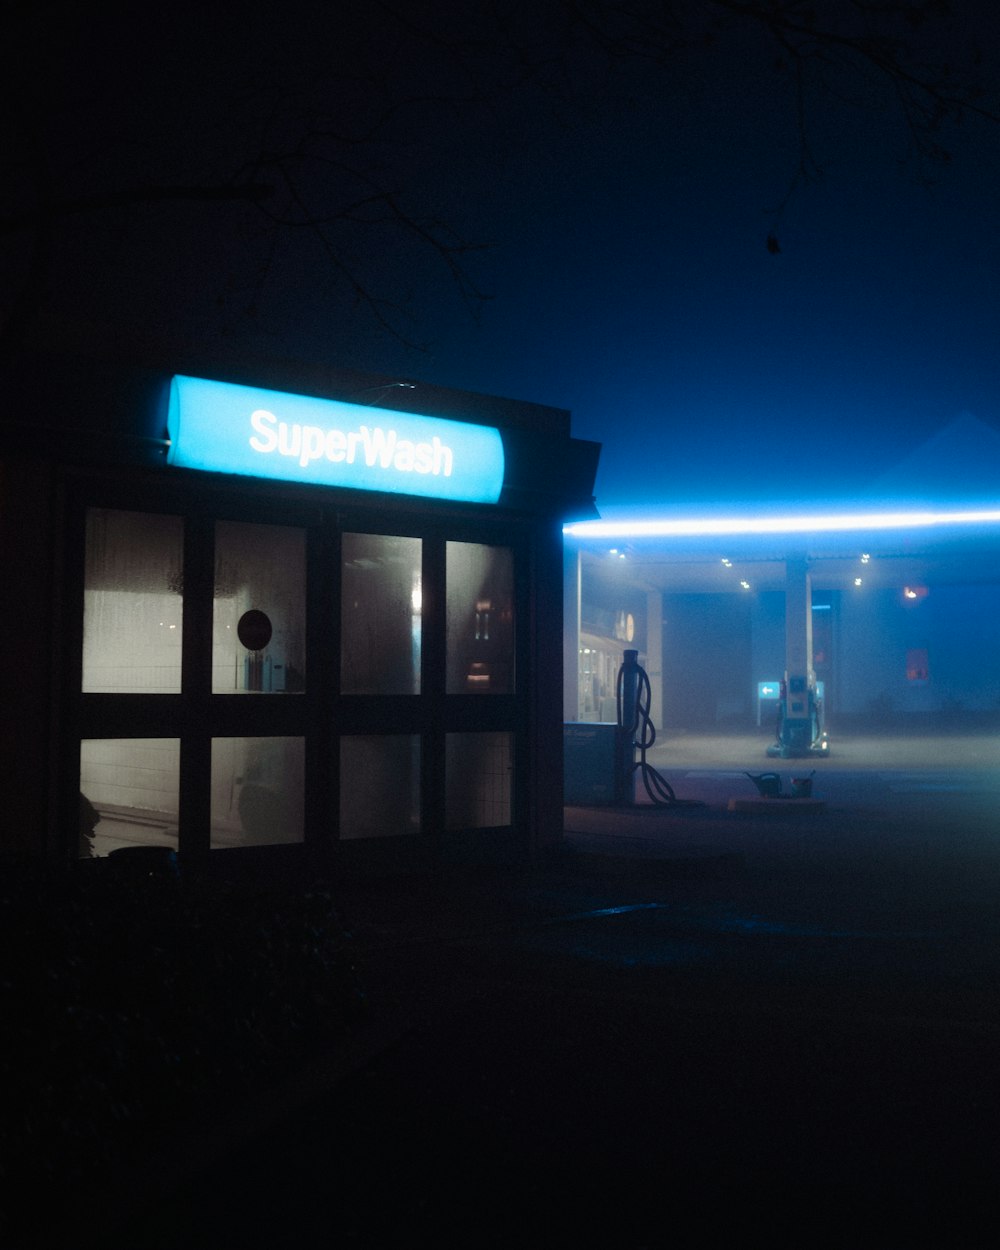 man in black jacket standing near blue and white store during night time